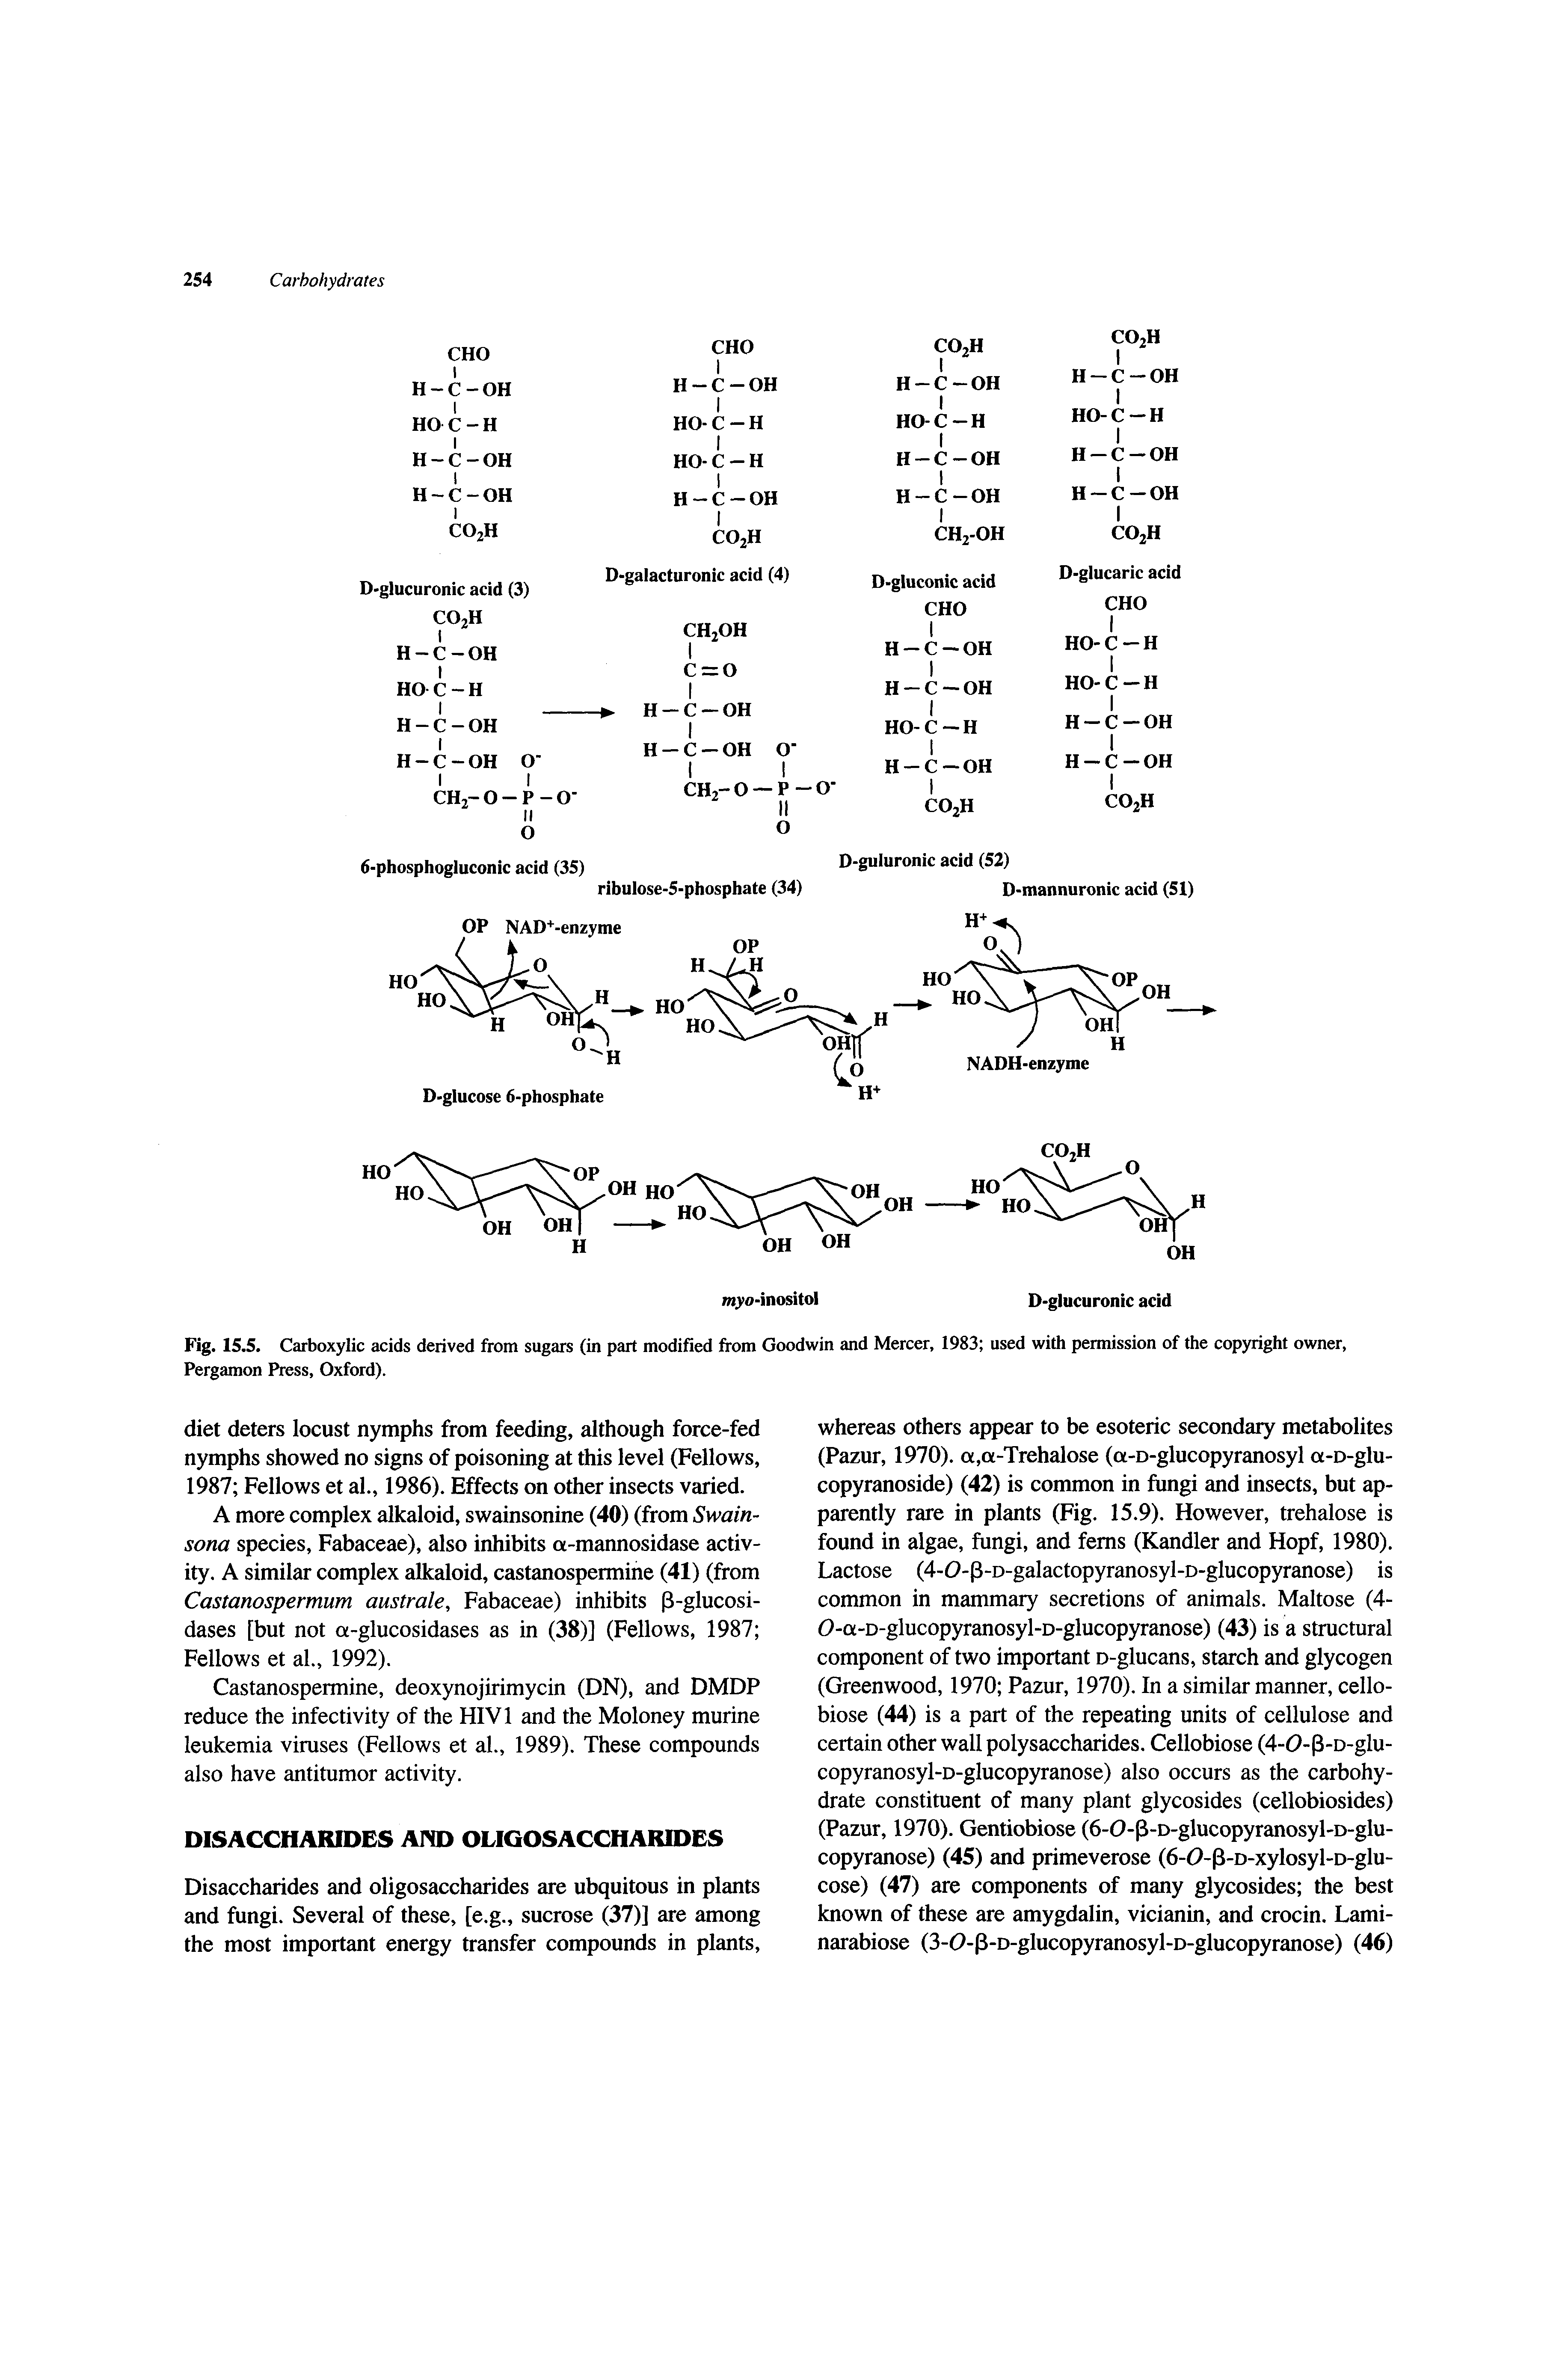 Fig. 15.5. Carboxylic acids derived from sugars (in part modified from Goodwin and Mercer, 1983 used with permission of the copyright owner, Pergamon Press, Oxford).